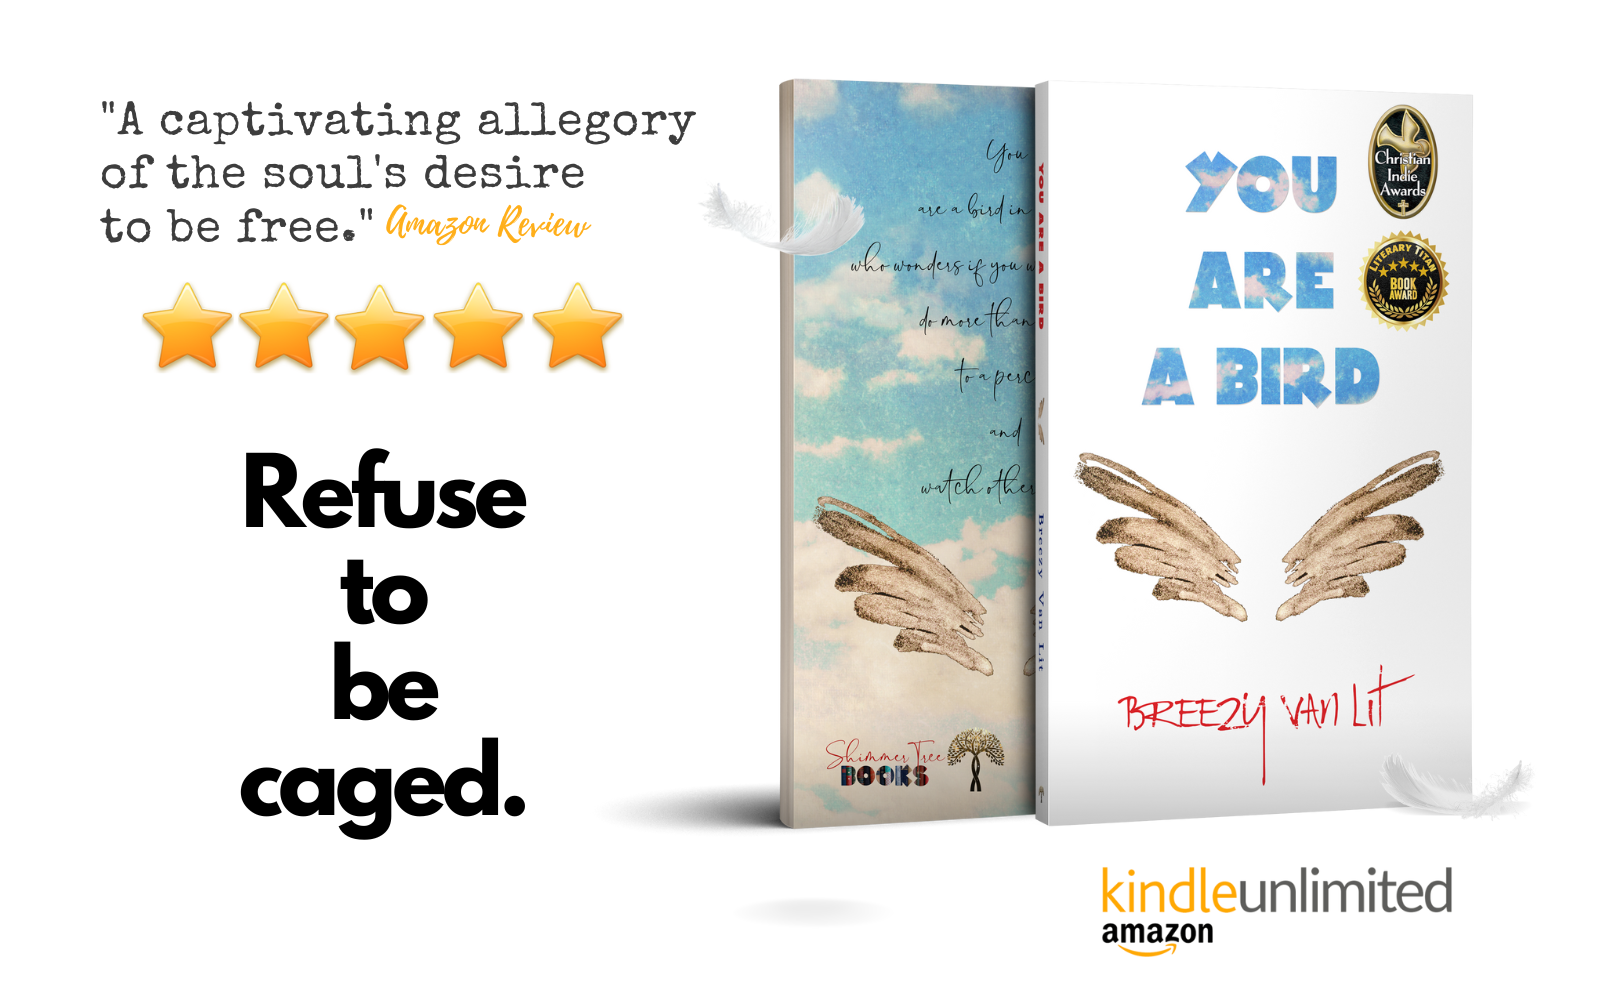 Award winning novella, You Are a Bird, is free on Kindle Unlimited